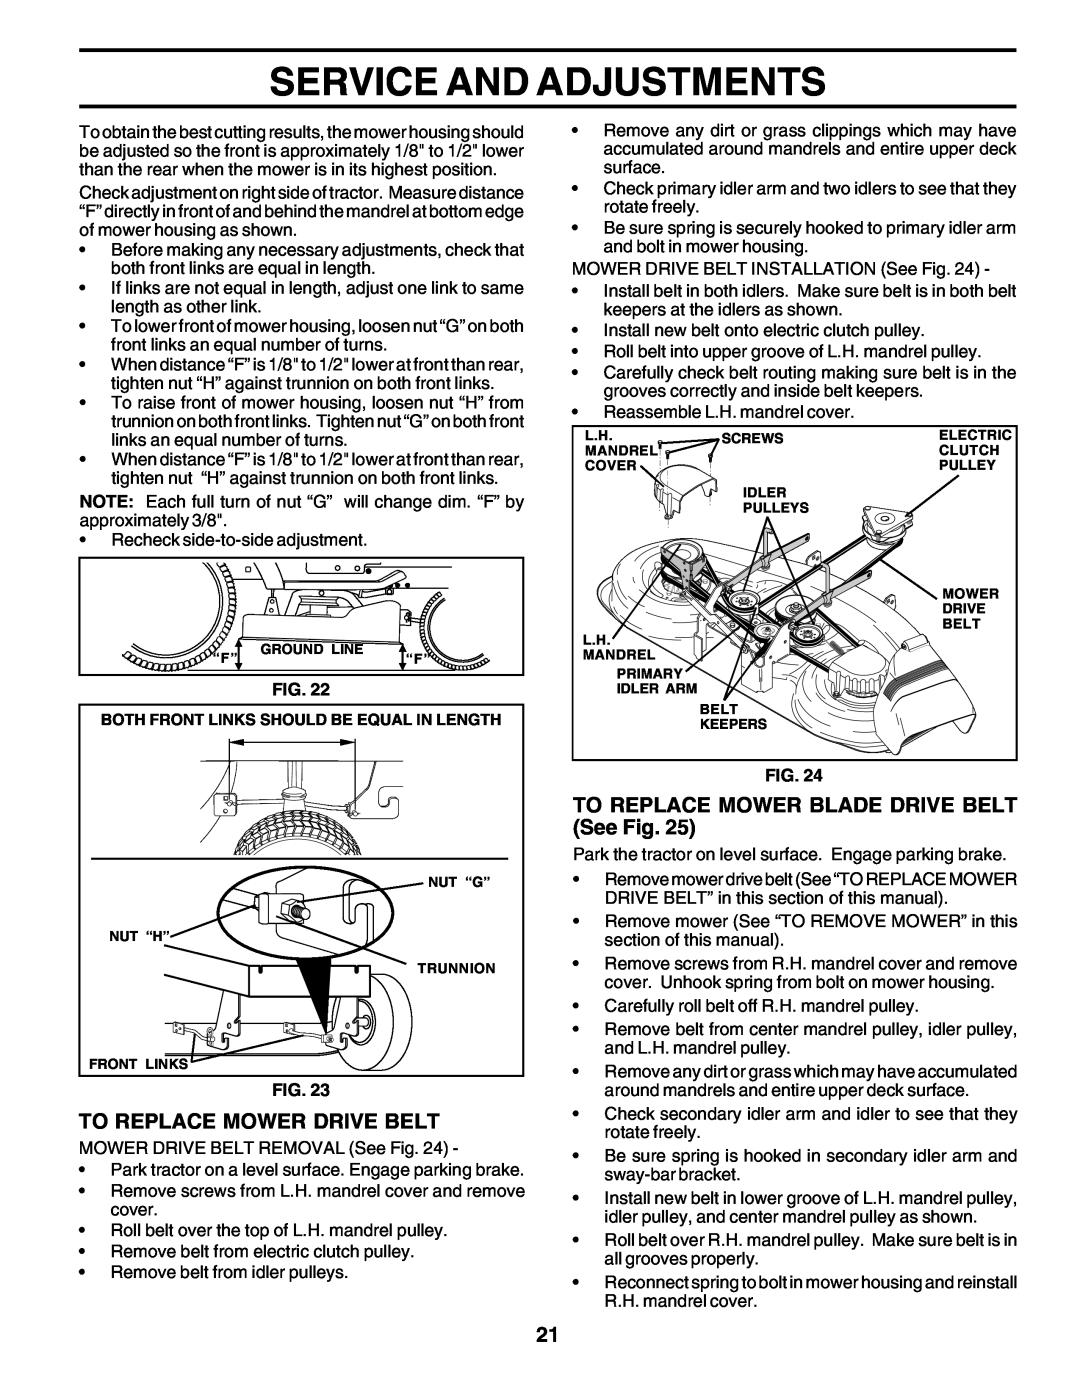 Poulan 177271 owner manual Service And Adjustments, To Replace Mower Drive Belt, TO REPLACE MOWER BLADE DRIVE BELT See Fig 